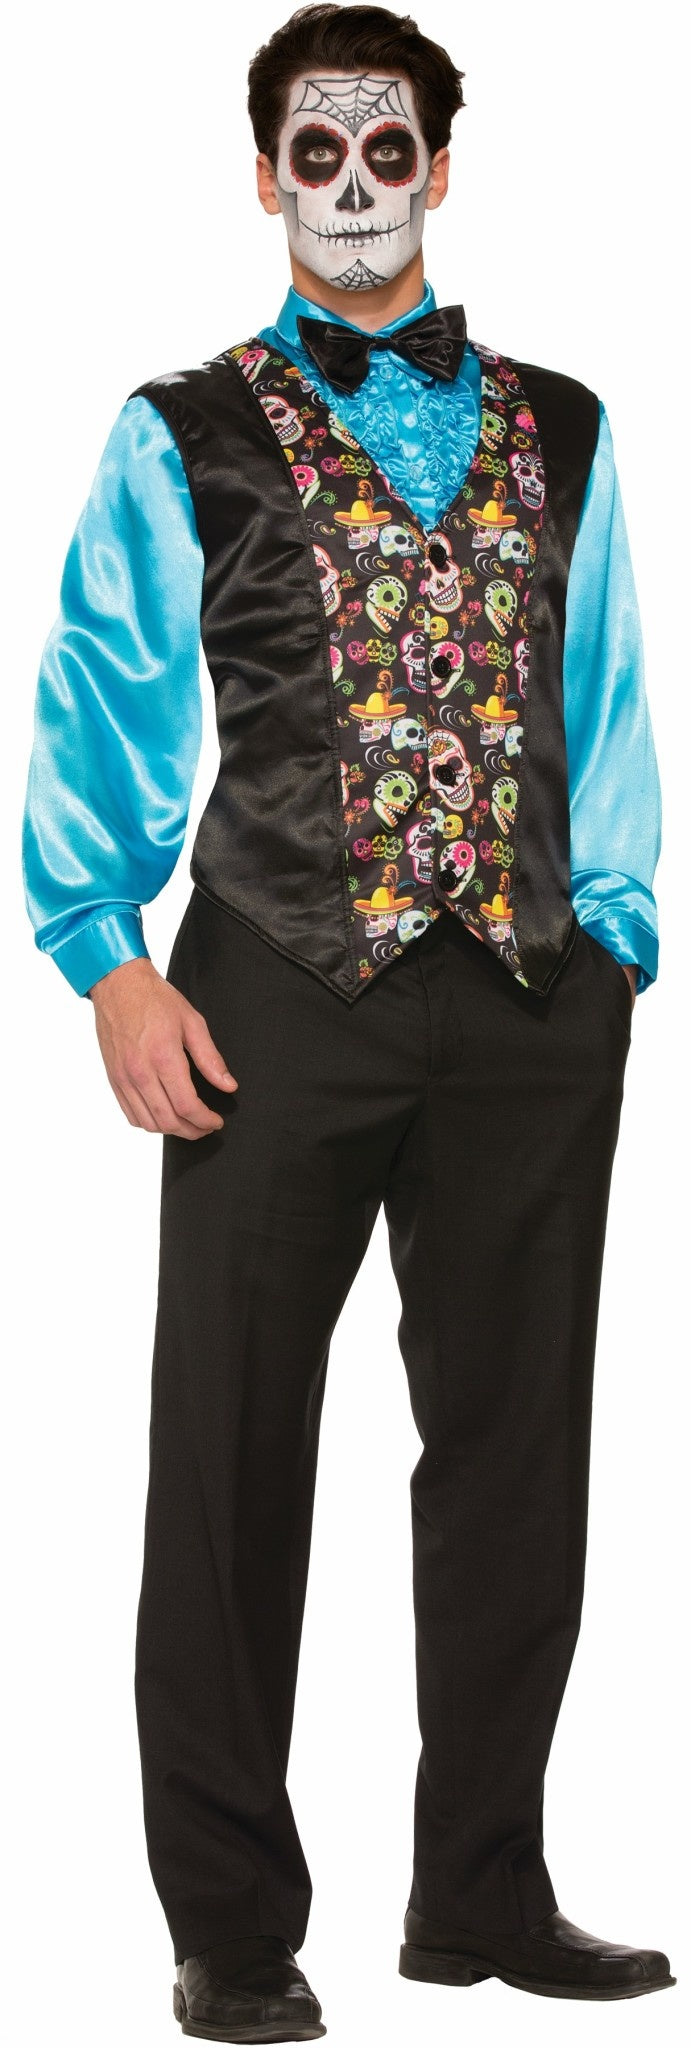 Day of The Dead Vest - Standard Adult Size